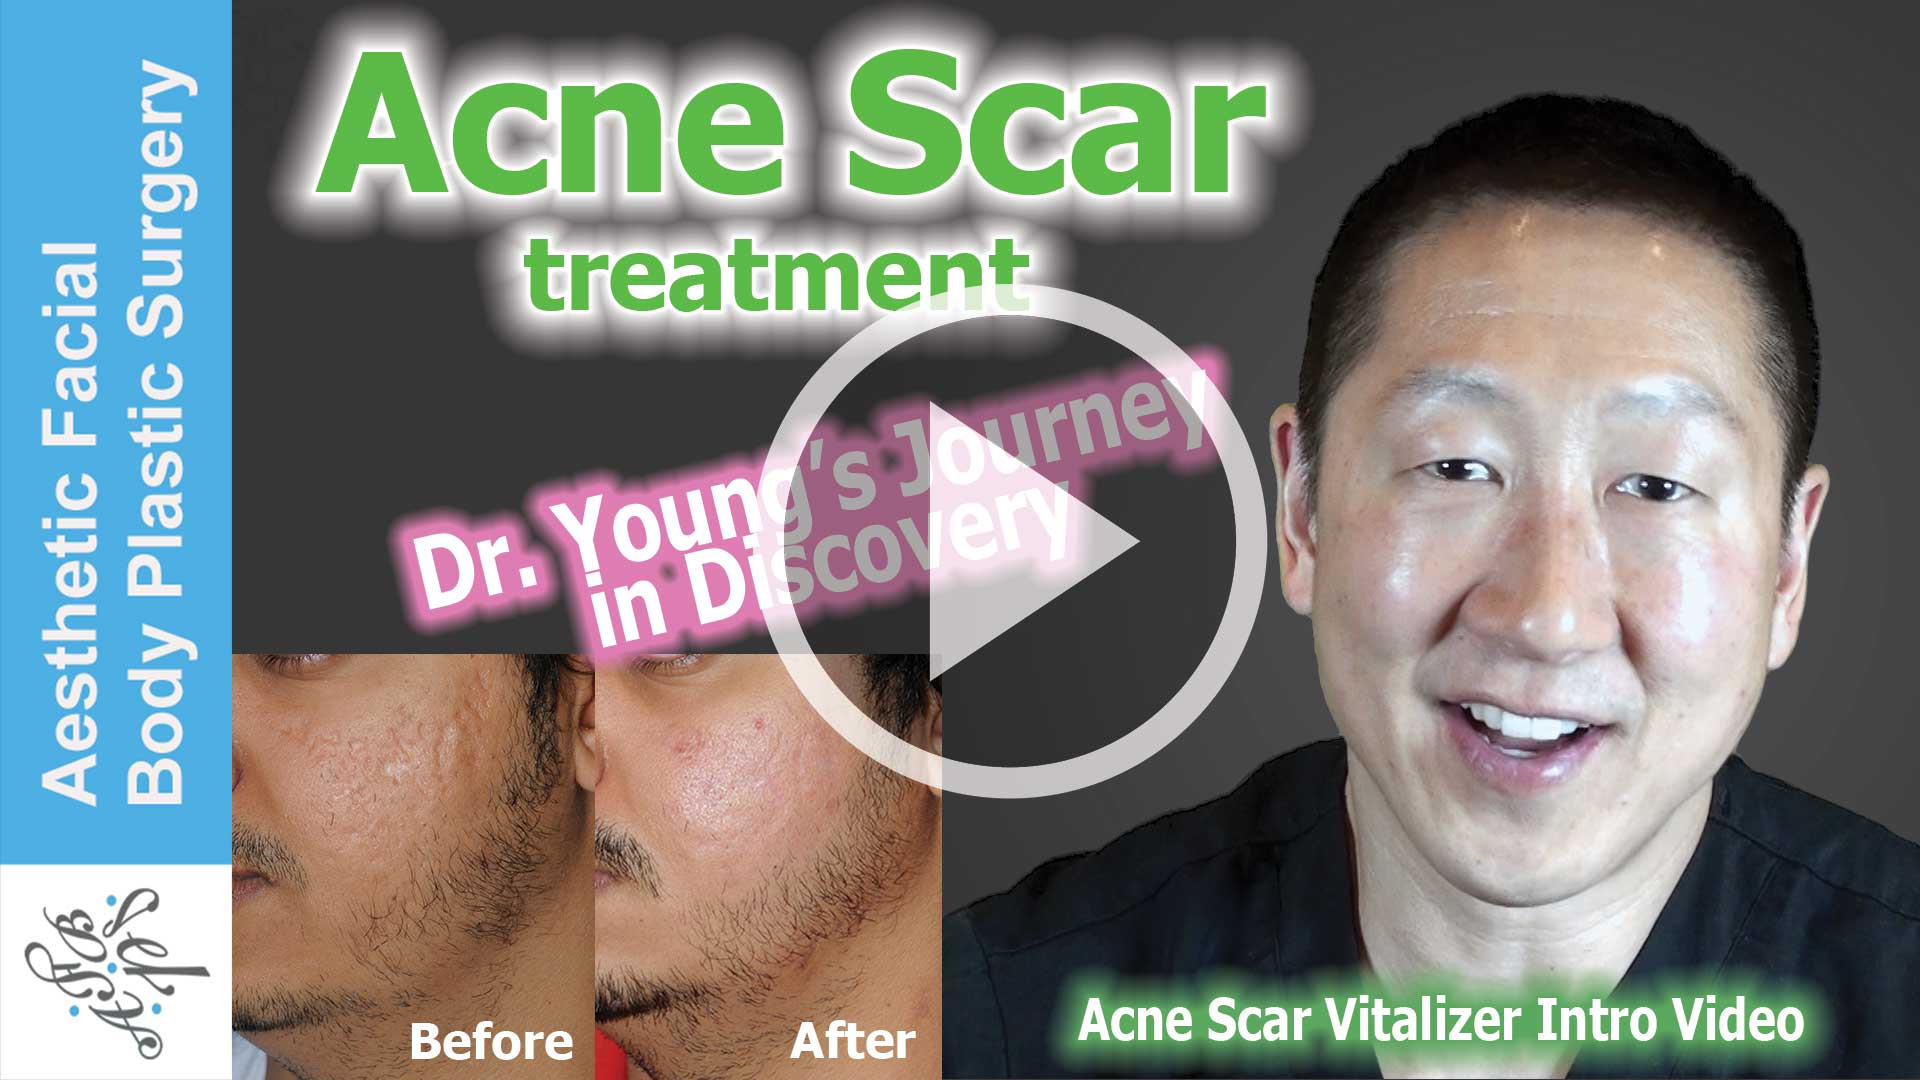 Treat All Types of Acne Scars in One Treatment in 2 Hours with the New Acne Scar Vitalizer Treatment